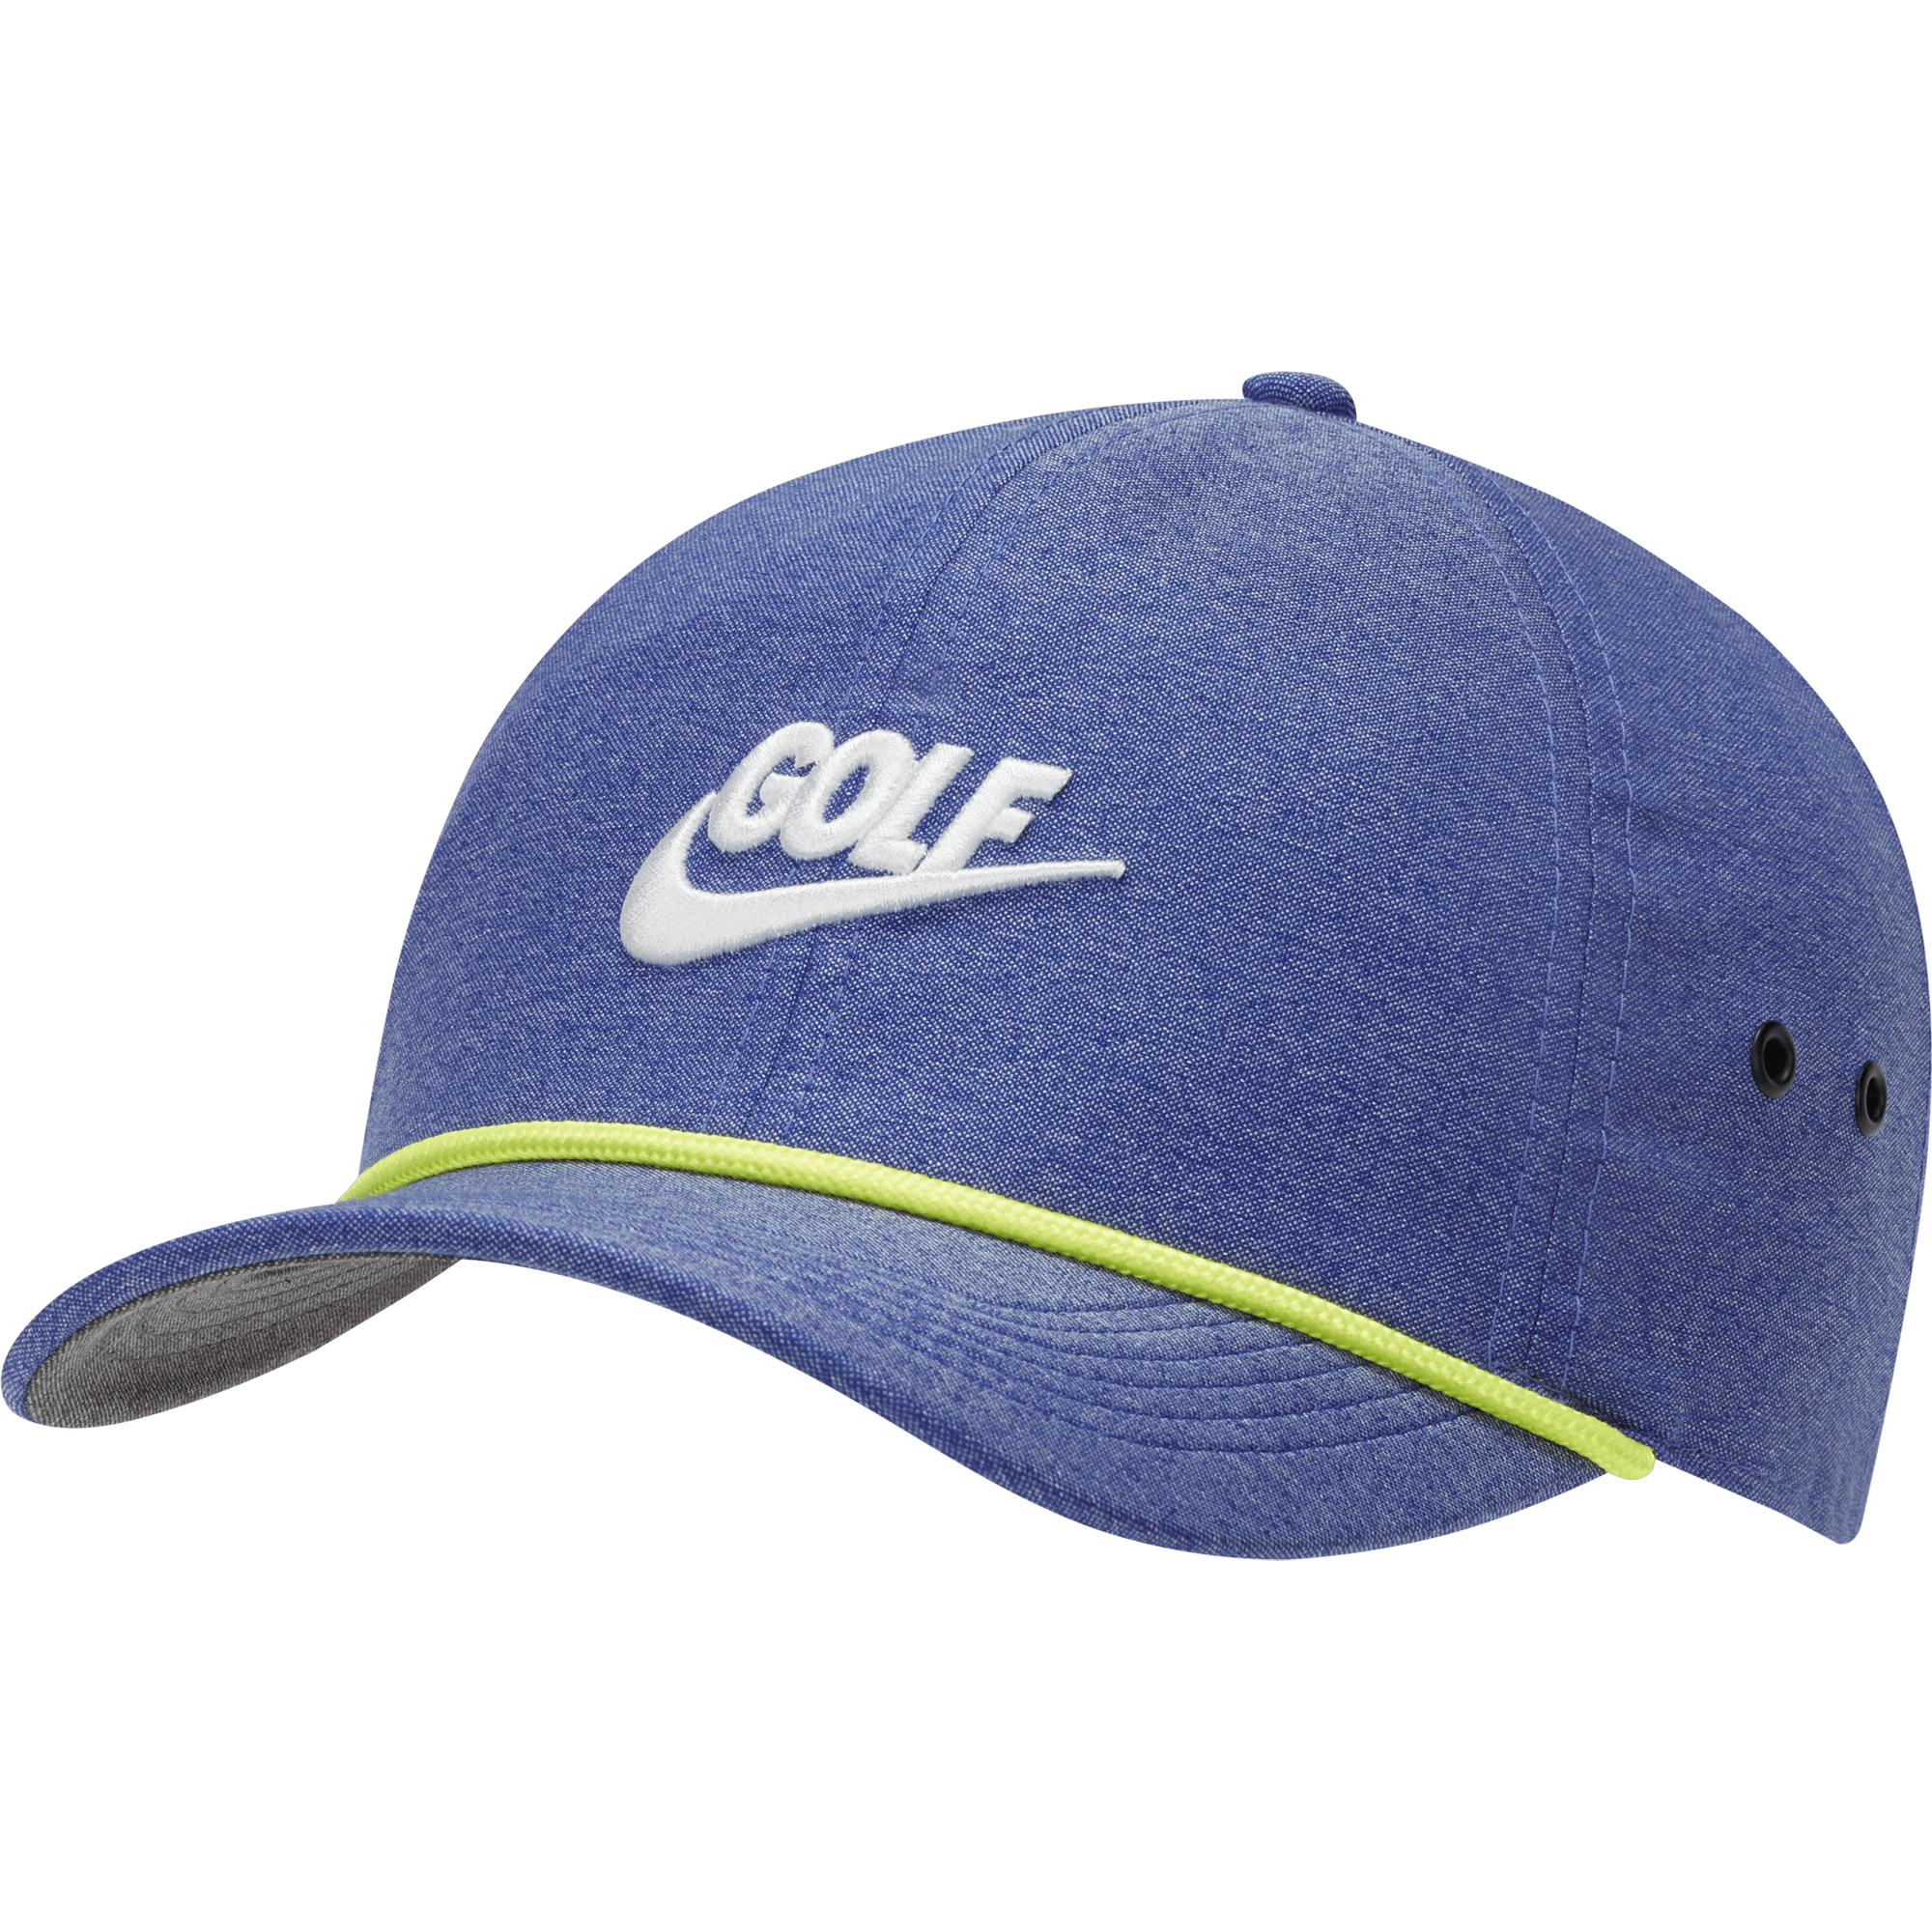 nike golf hat with rope